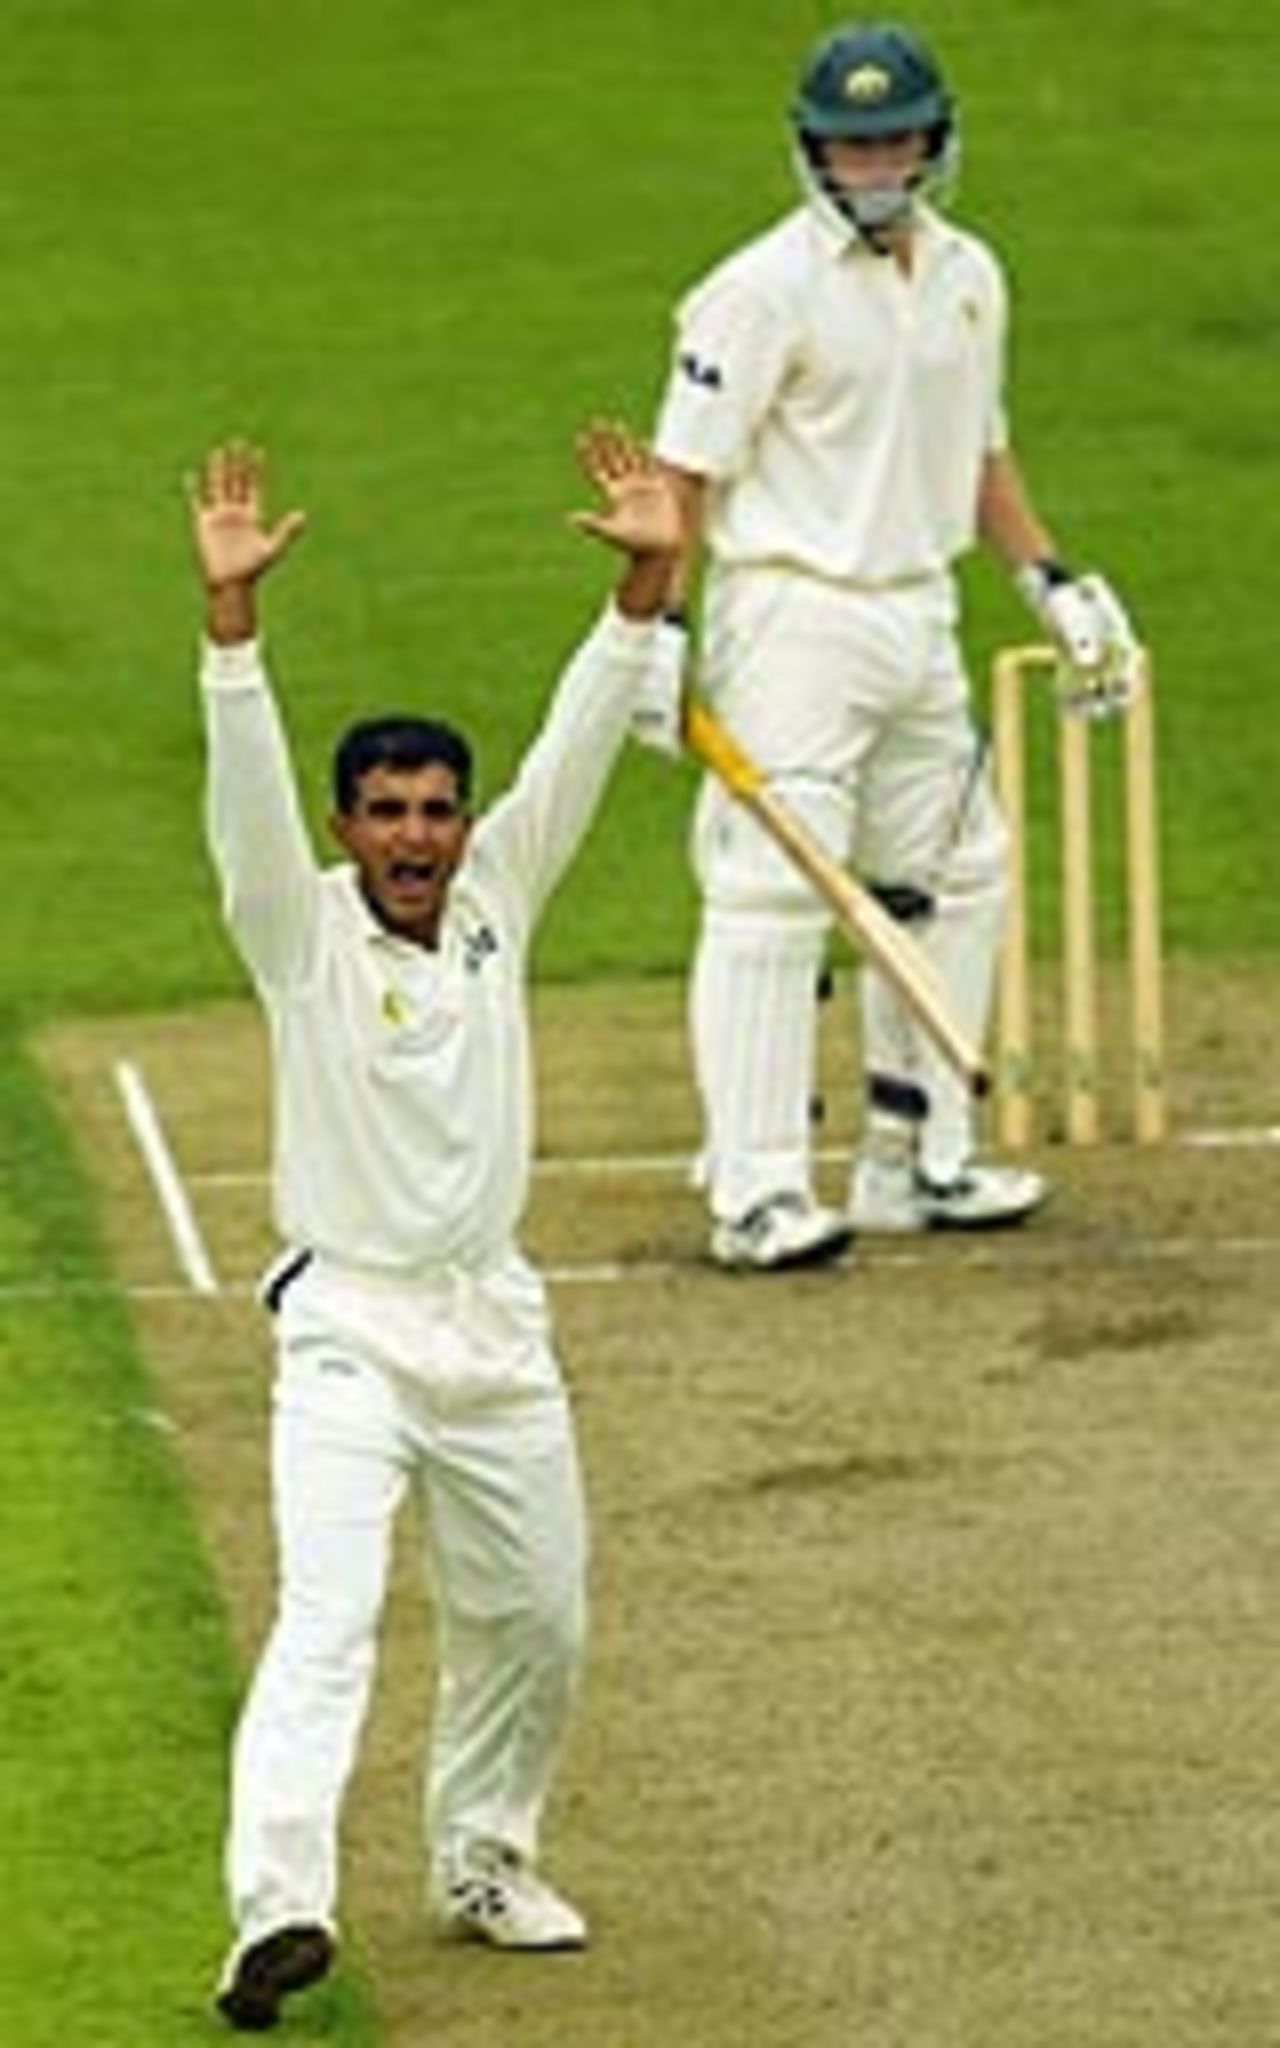 Sourav Ganguly launches into an exuberant appeal against Chris Rogers, Australia A v Indians, tour game, Hobart, 1st day, December 19, 2003